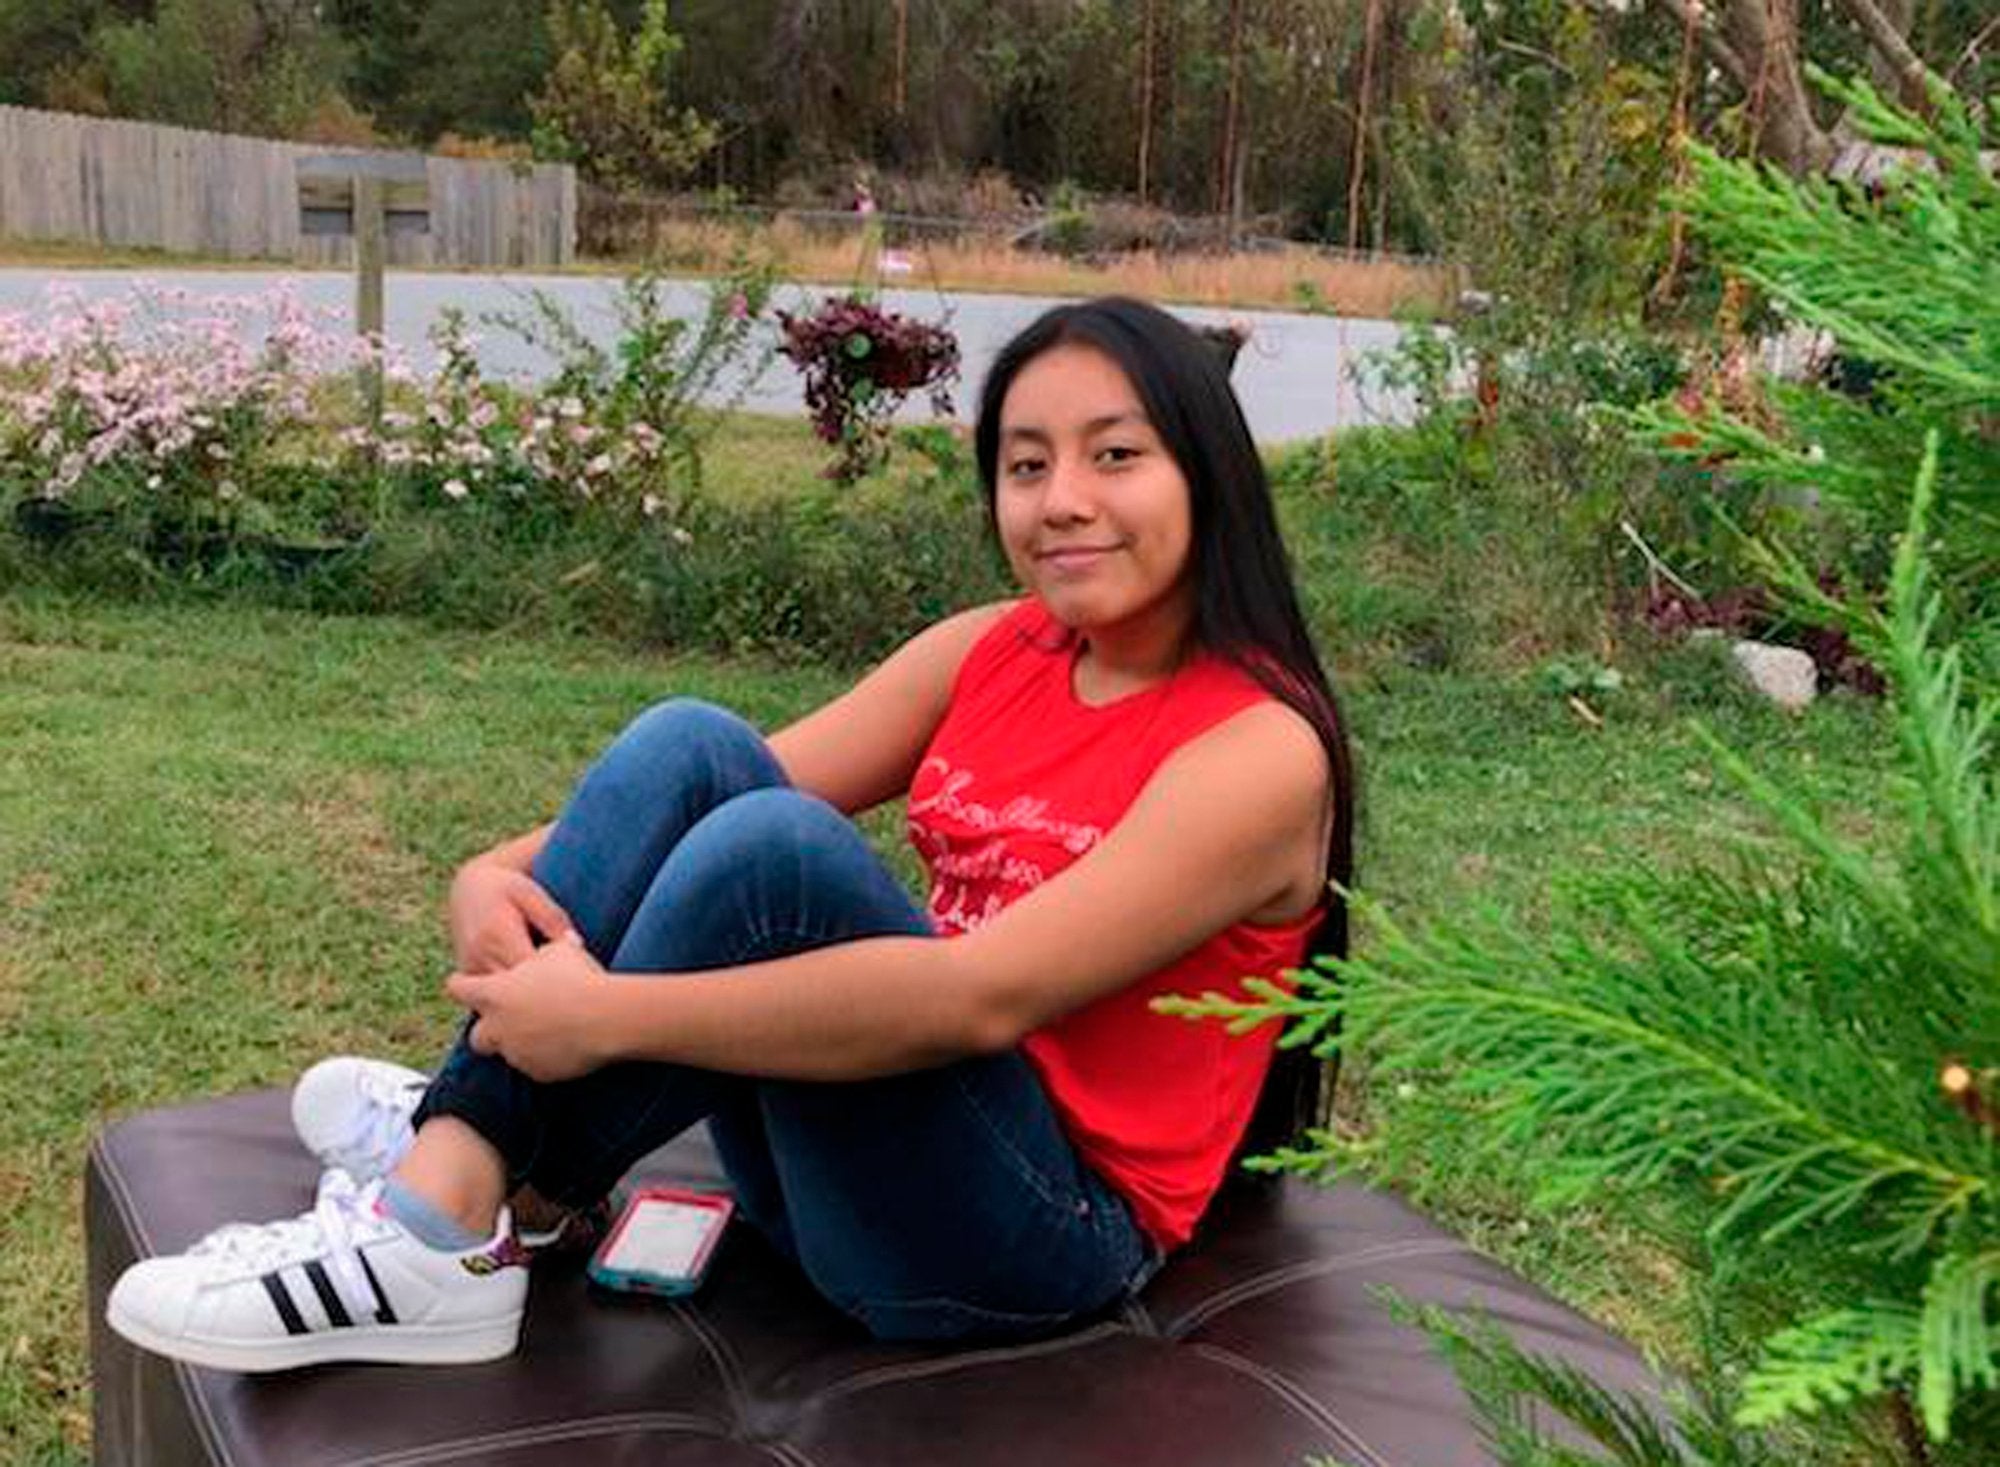 Hania Noelia Aguilar was kidnapped outside her North Carolina home in November and her body was found off a rural road following a three-week search